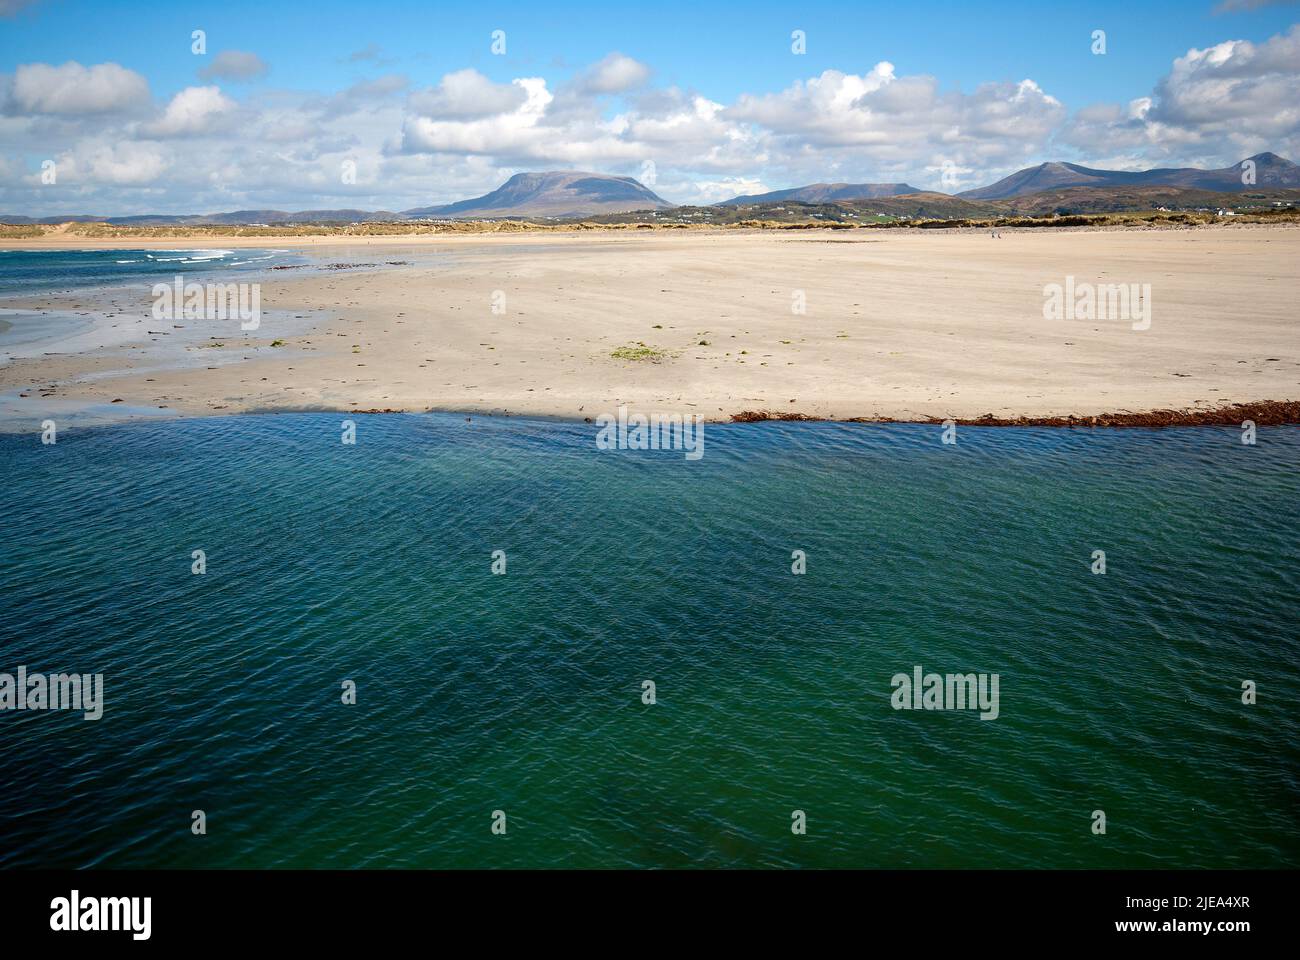 Magheroarty Beach with low tide and the flat silhouette of Mount Muckish (Derryveagh Mountains) in the background, County Donegal, Ireland Stock Photo